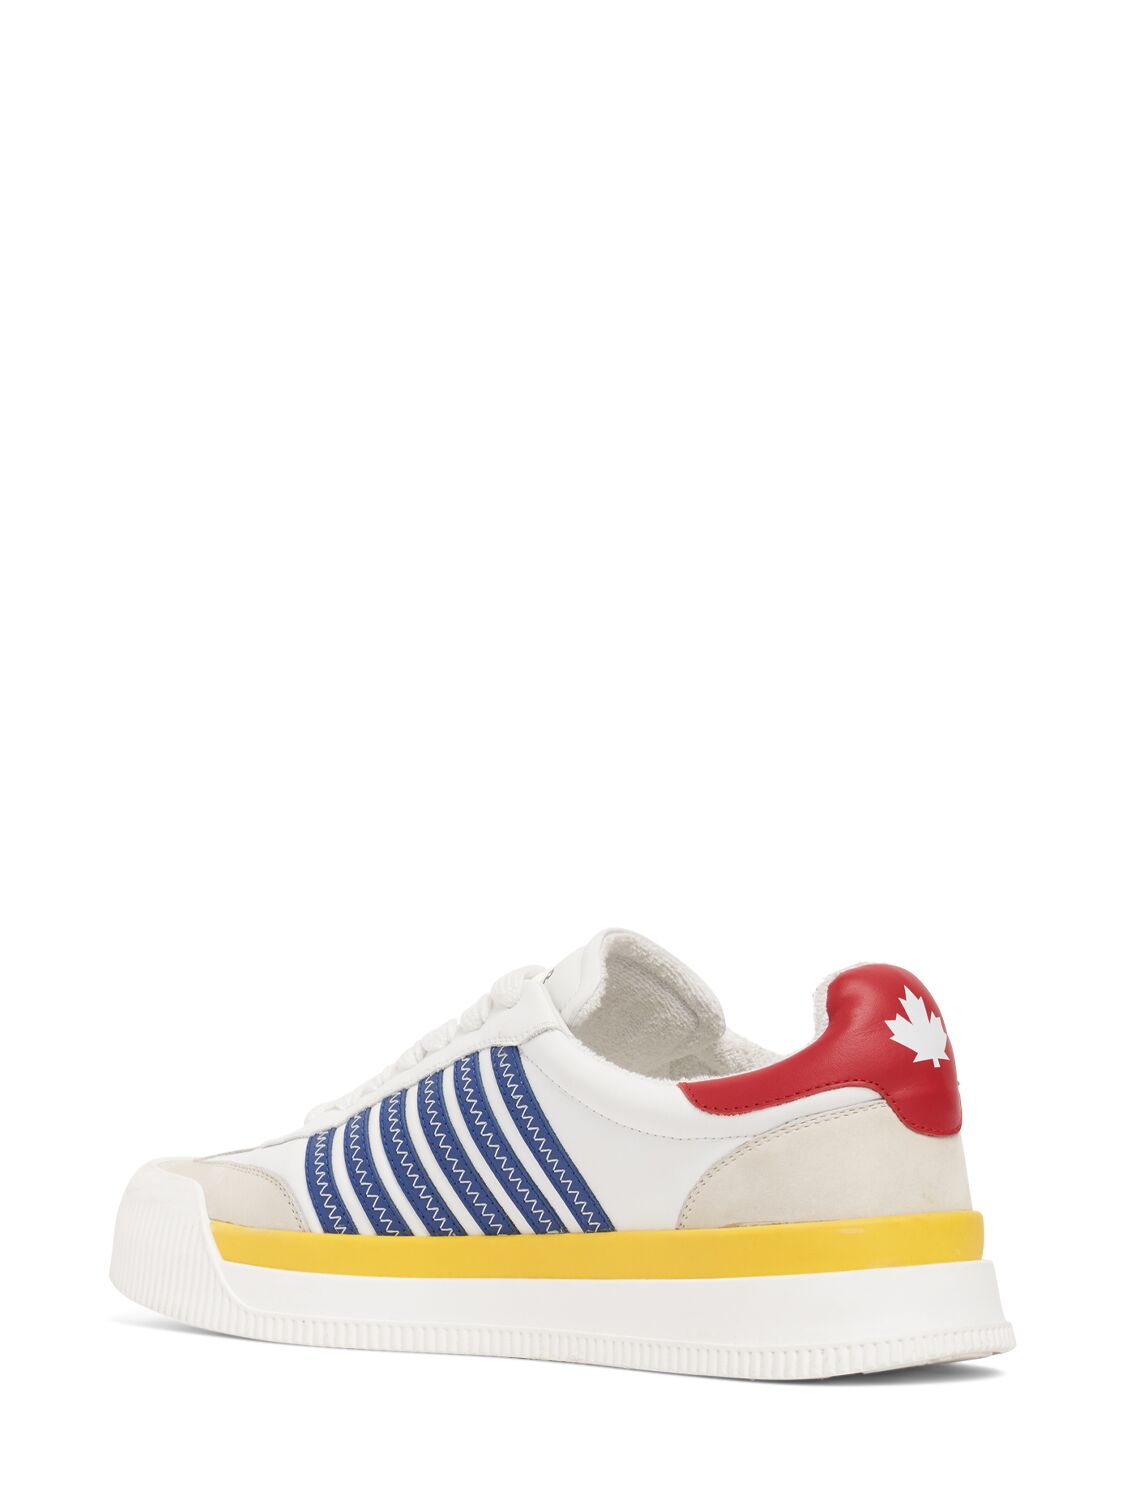 Shop Dsquared2 Logo Leather Sneakers In White,blue